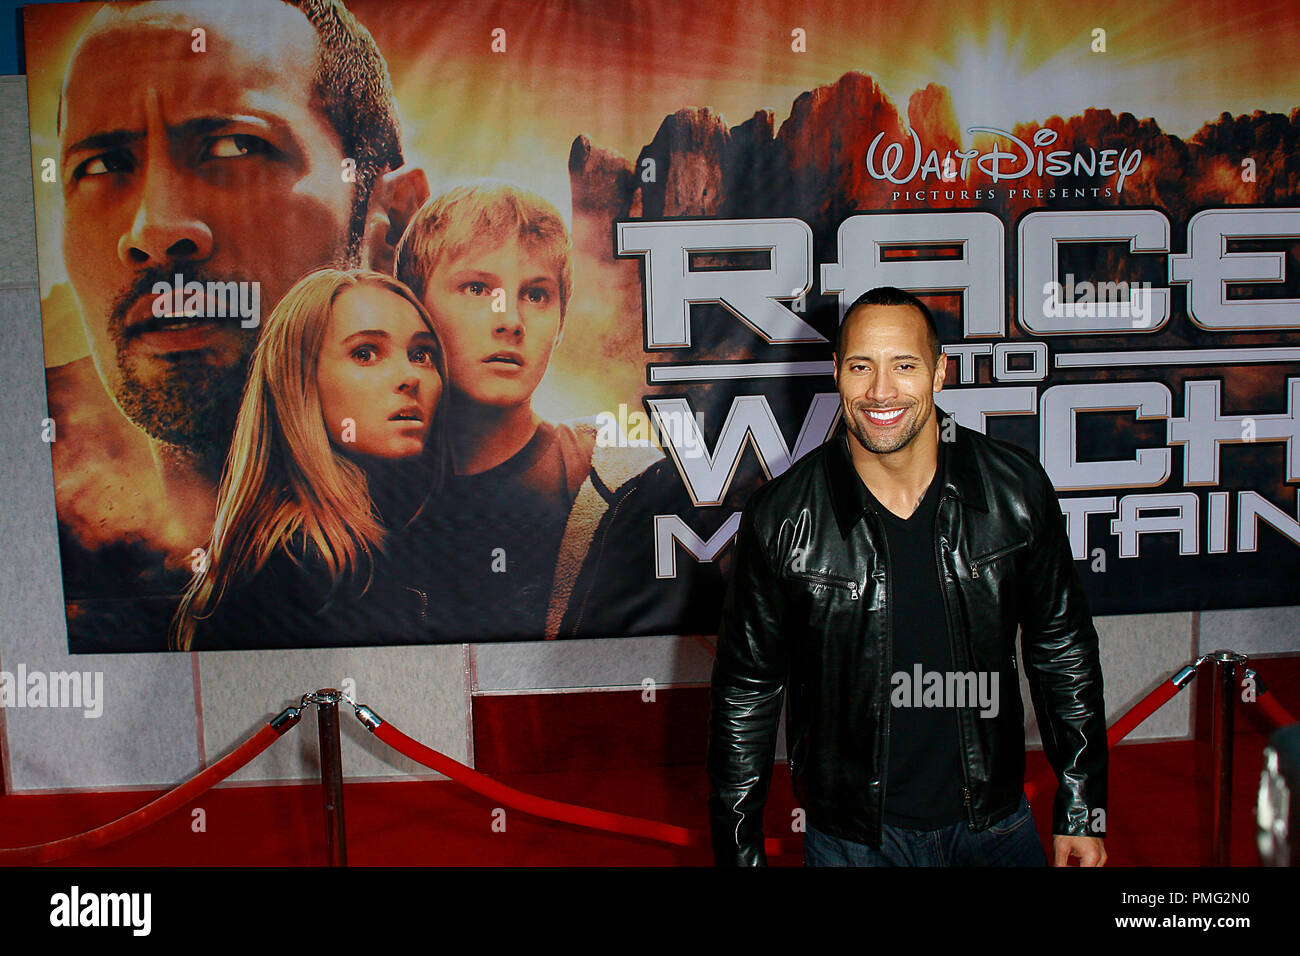 Race to Witch Mountain Premiere Dwayne Johnson  3-11-2009 / El CapitanTheatre / Hollywood, CA / Paramount Pictures / © Joseph Martinez/Picturelux - All Rights Reserved  File Reference # 30001 0013PLX   For Editorial Use Only -  All Rights Reserved Stock Photo